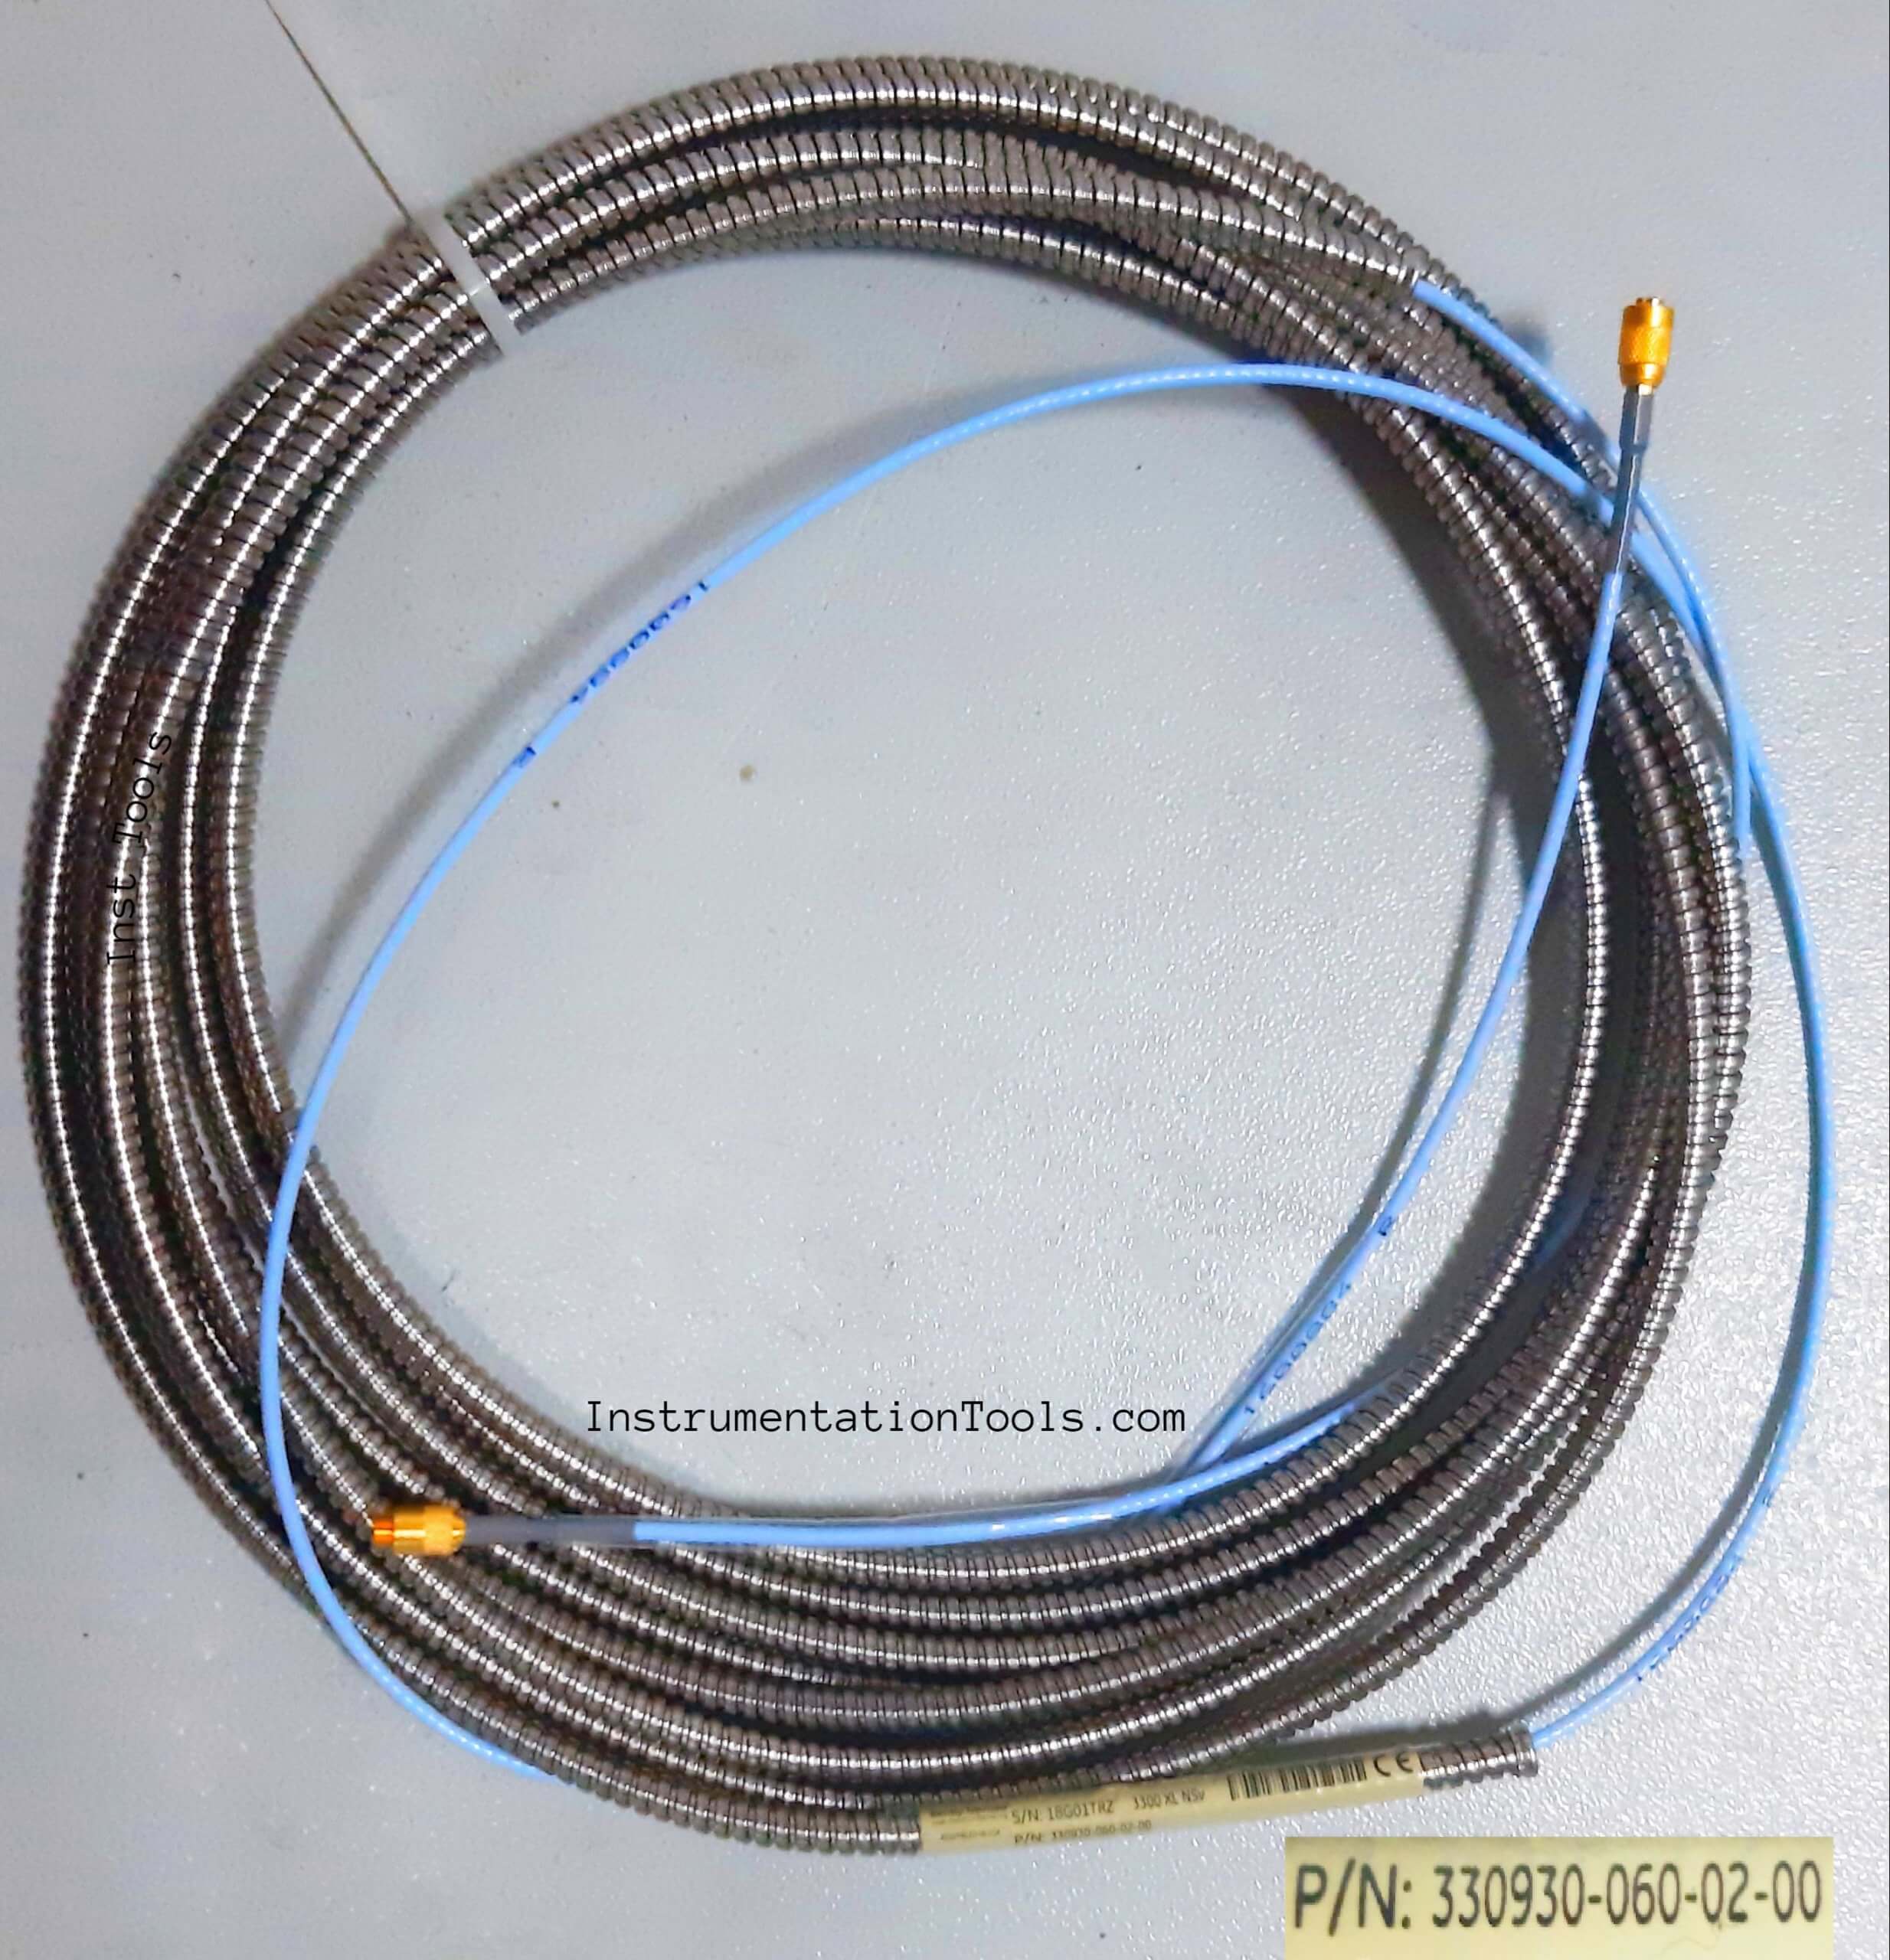 Bently Nevada Extension Cable